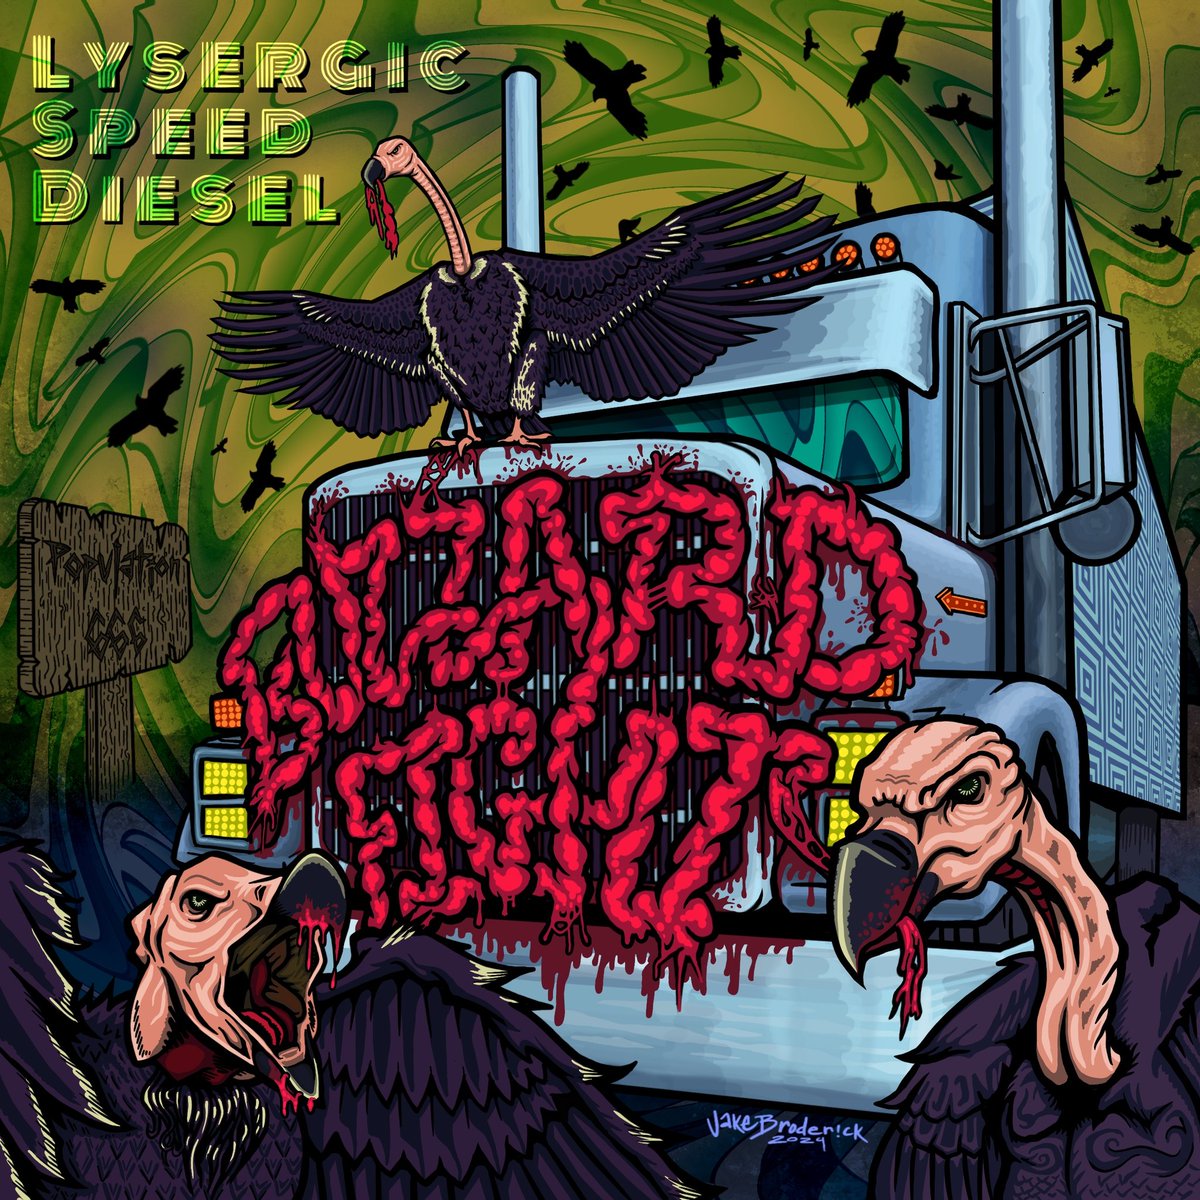 Buzzard Fight - Lysergic Speed Diesel (New Album) 2024
buzzardfight.bandcamp.com/album/lysergic…
The debut Album from Buzzard Fight with their signature Psychedelic Country Sludge sound
Buzzard Fight are a 3-piece, Psychedelic Country Sludge band hailing from Kansas City, MO.